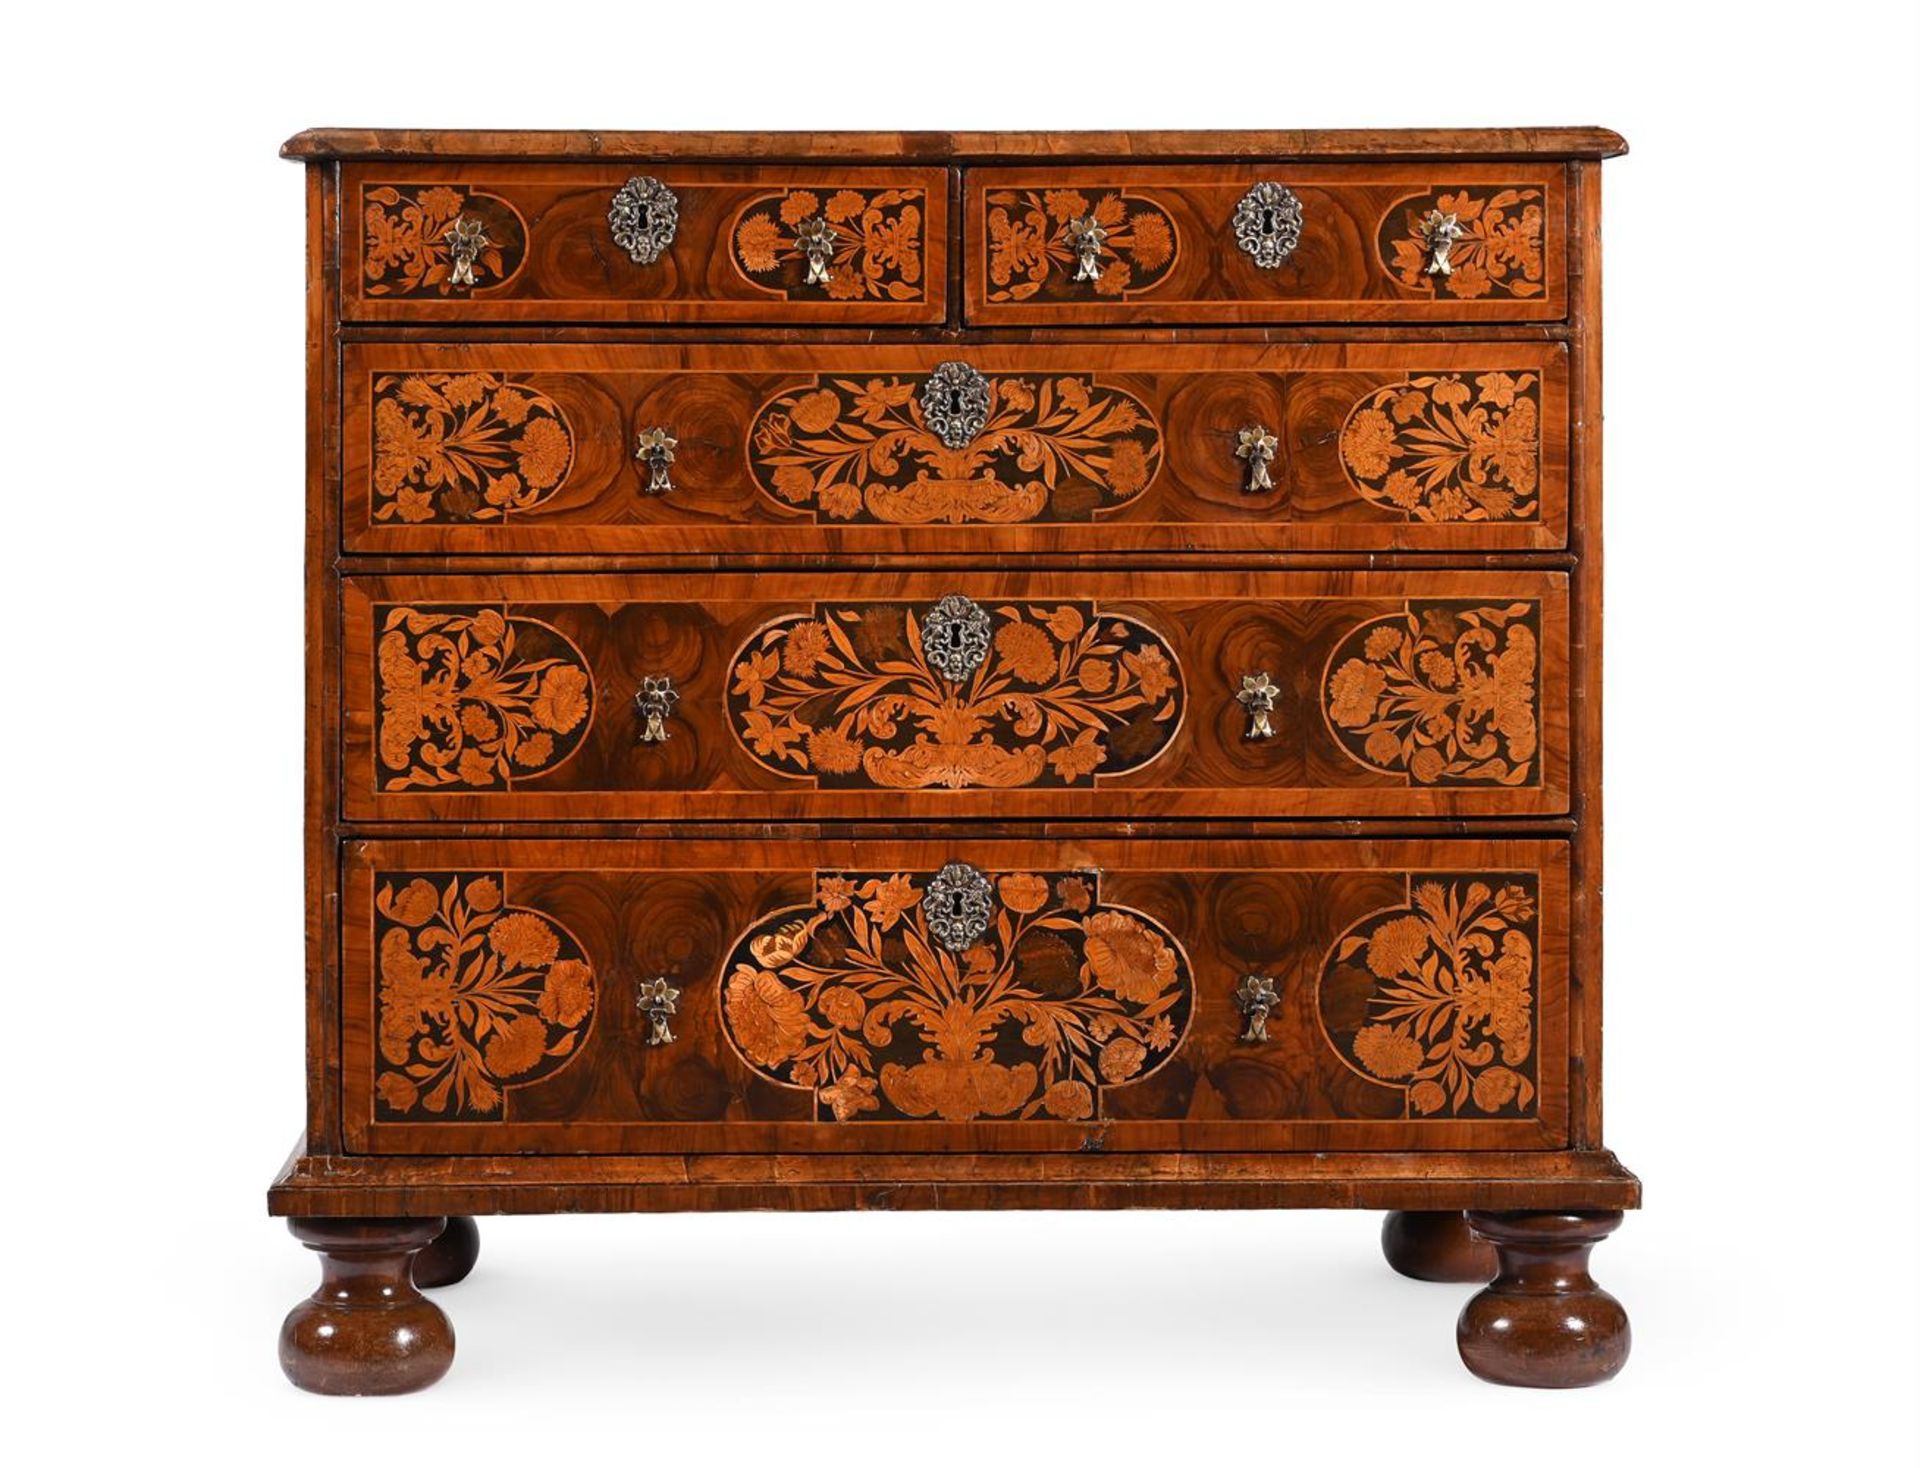 A CHARLES II OLIVEWOOD, WALNUT, FRUITWOOD OYSTER VENEERED AND MARQUETRY CHEST OF DRAWERS, CIRCA 1680 - Image 3 of 5